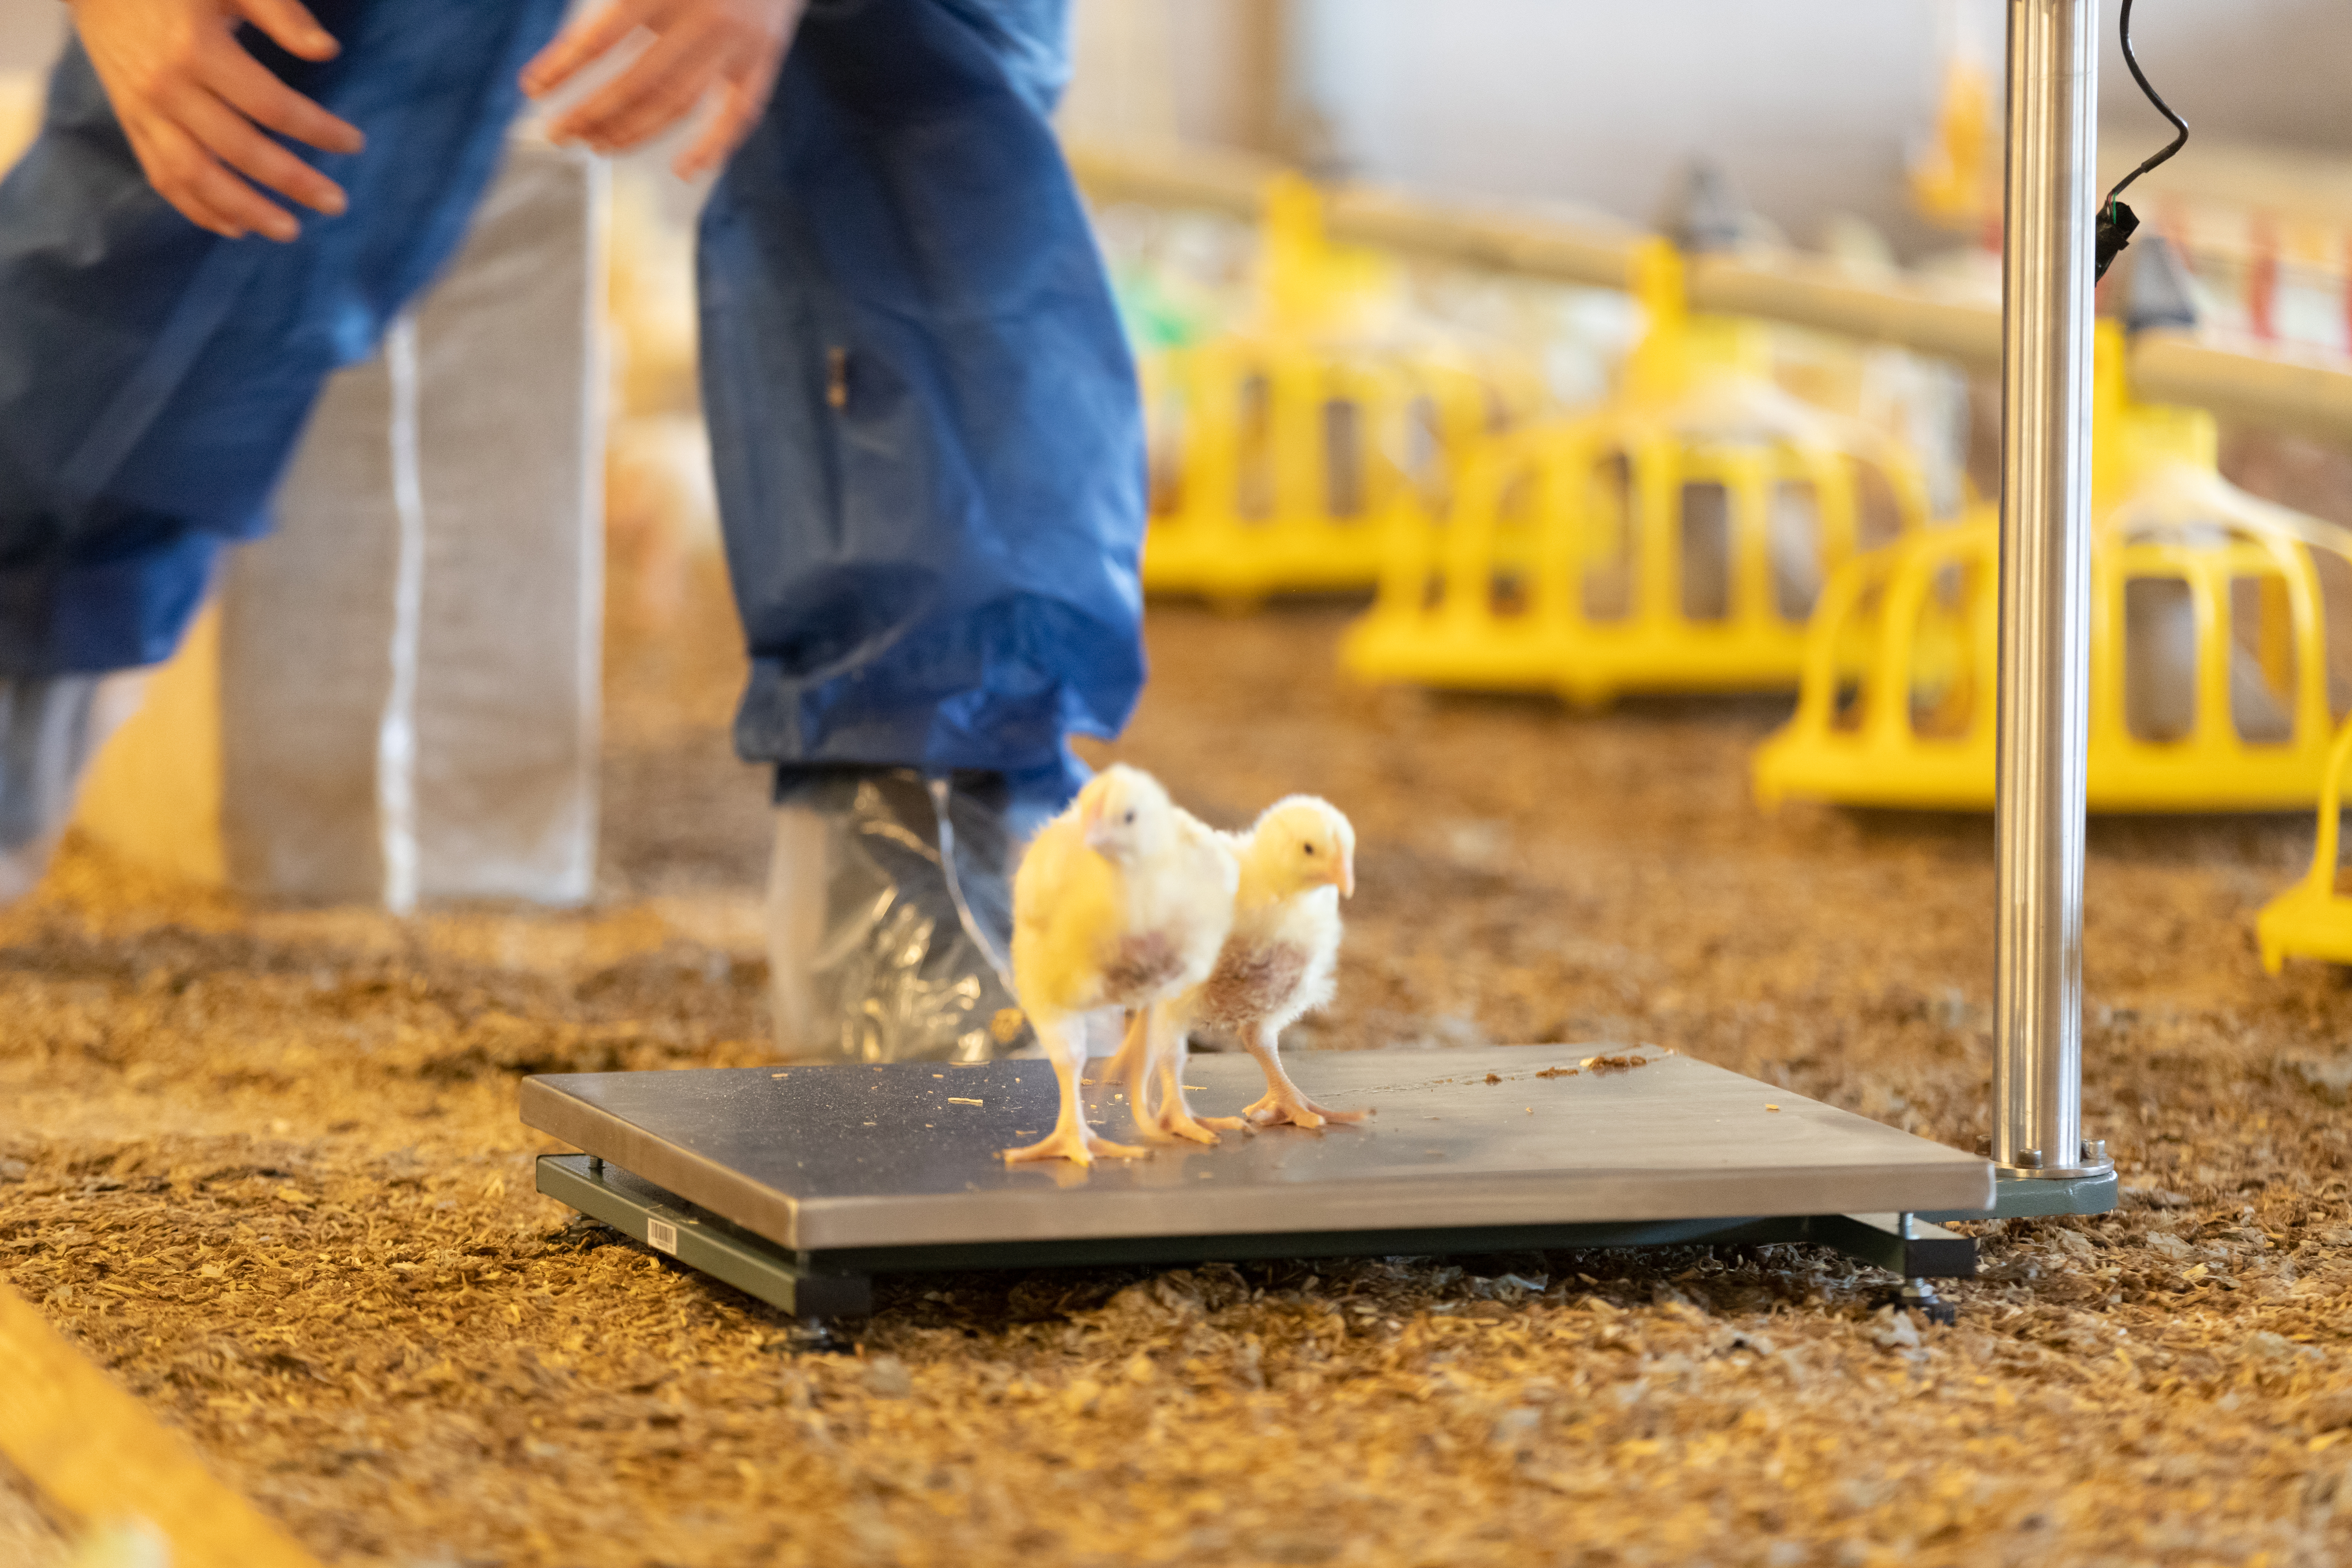 two baby chicks step onto a scale